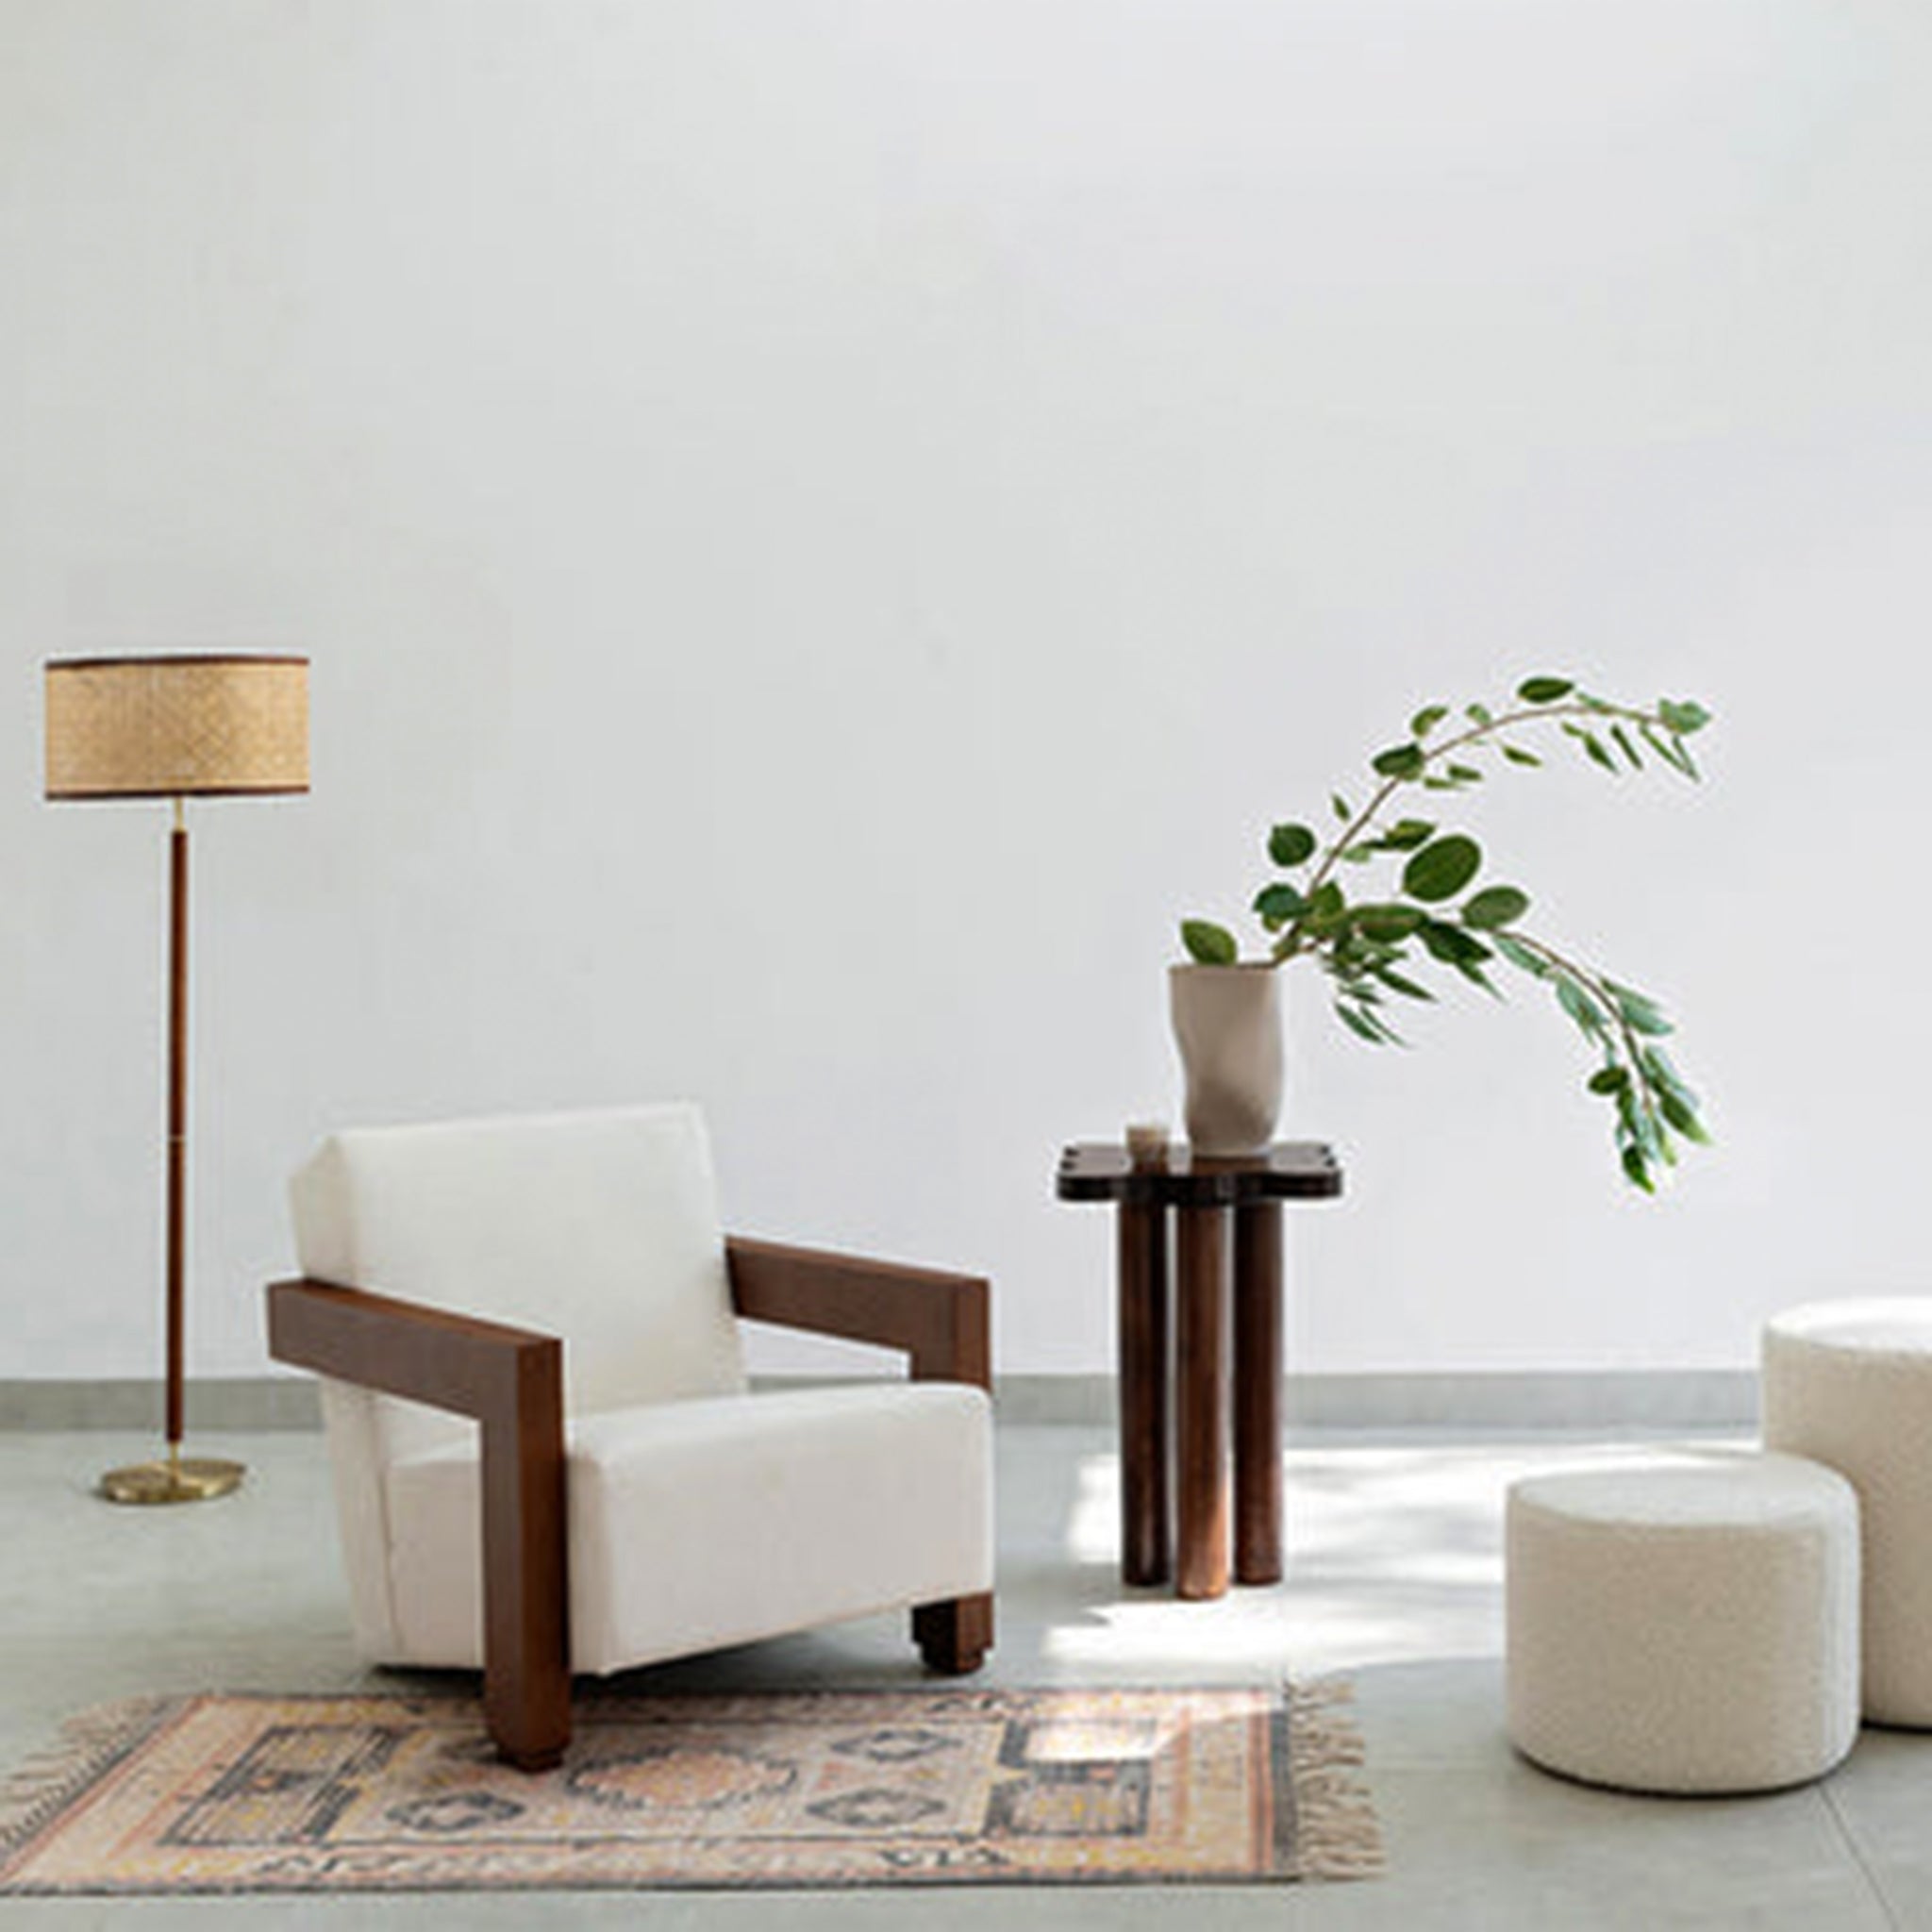 Modern living room setup featuring The Gerrit Accent Chair with white upholstery and wooden armrests, complemented by a floor lamp, a side table with a plant, and a patterned rug.